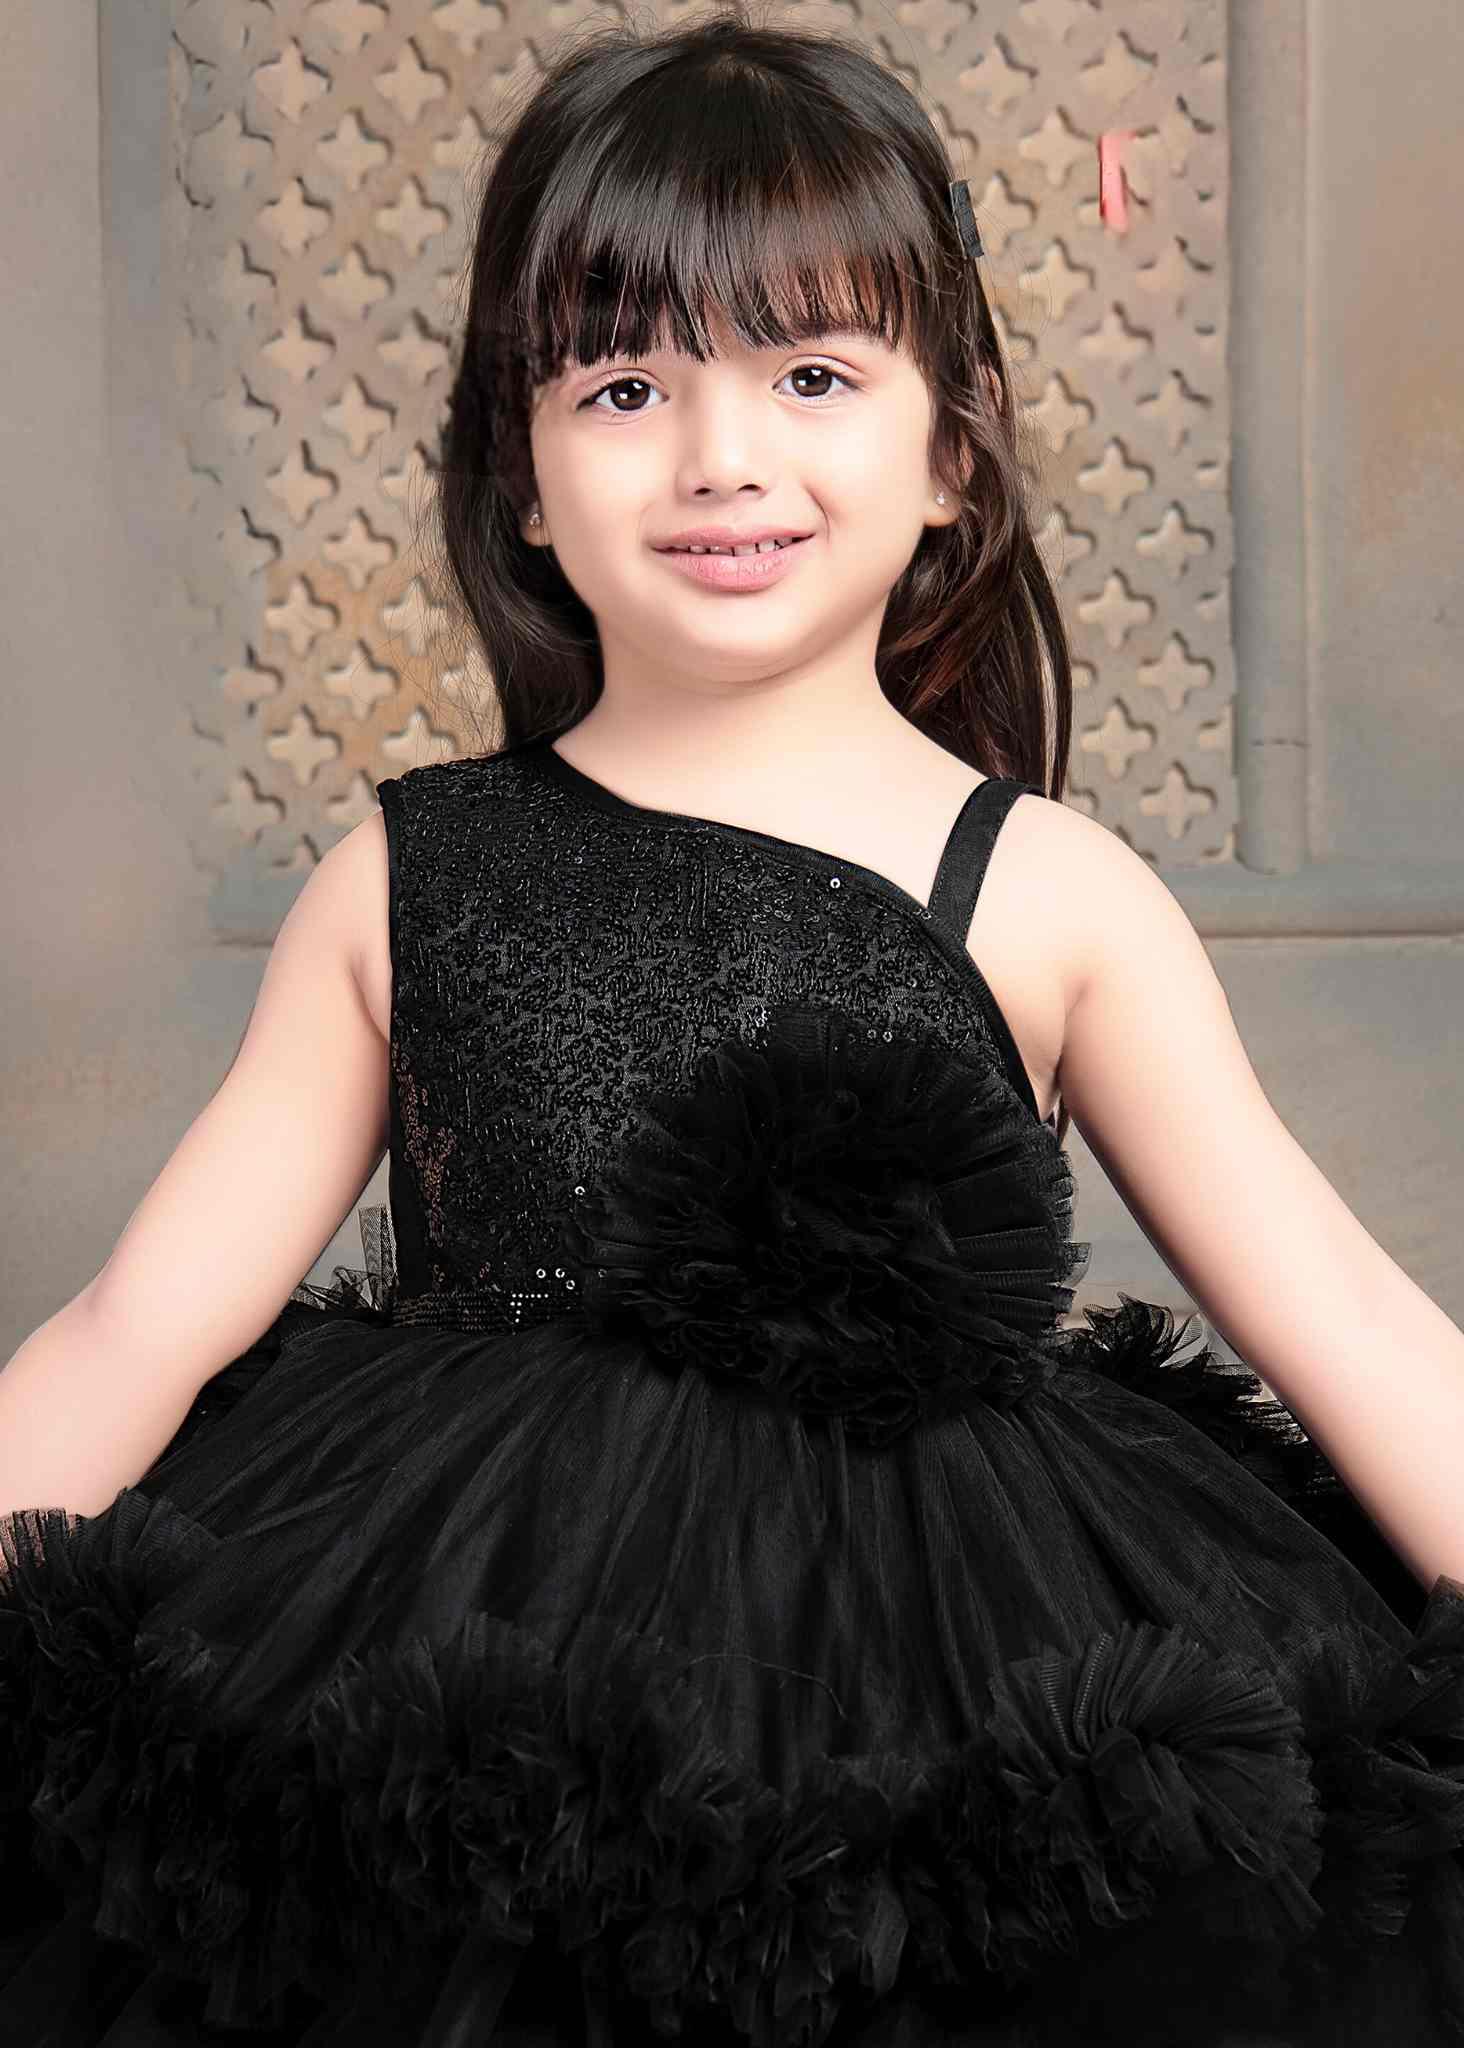 Wednesday Addams Black Tulle Dress Child Cosplay Gown Costumes for Girls -  Walmart.com